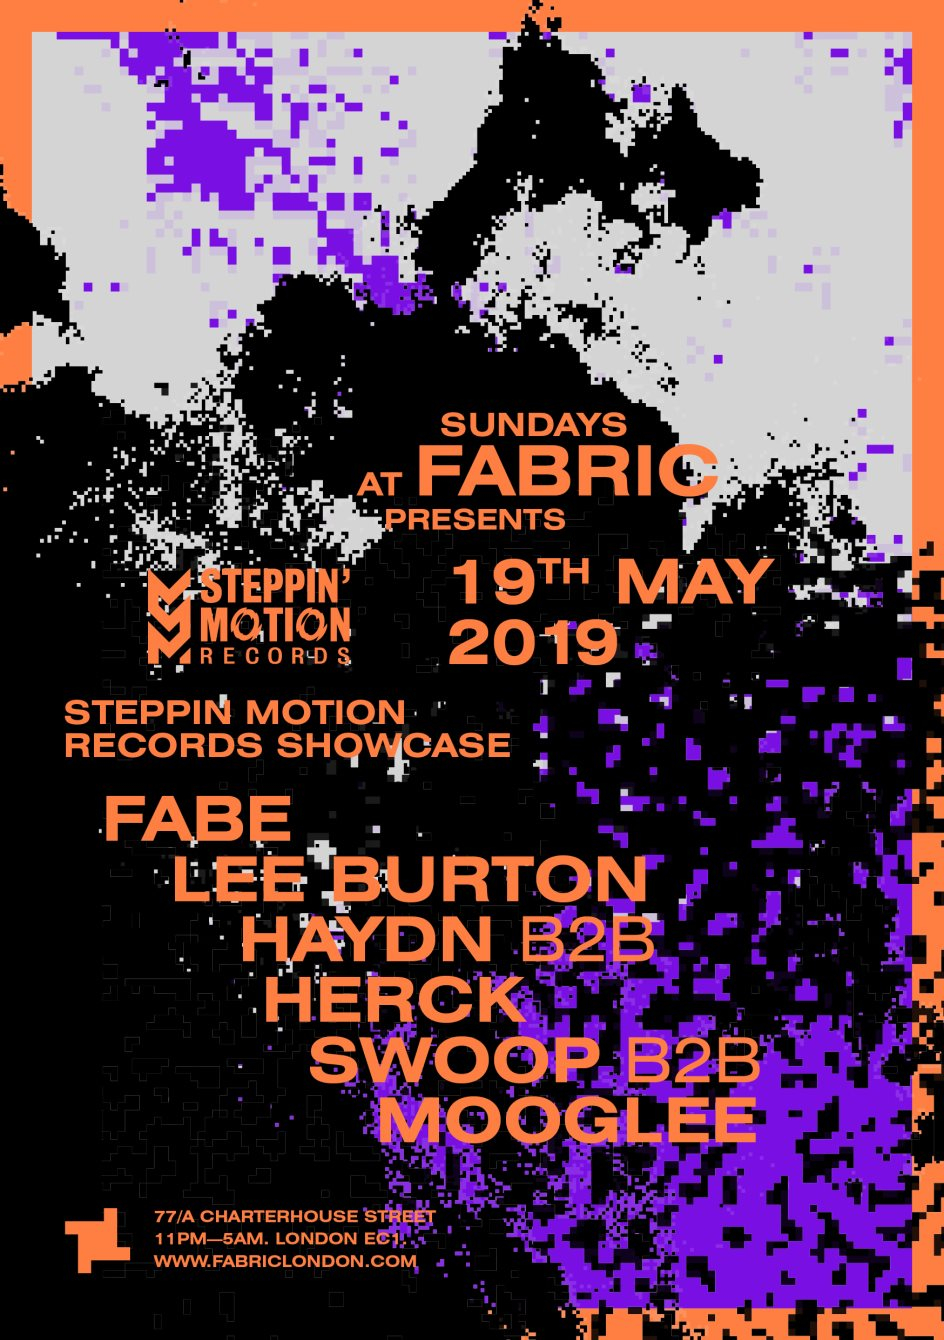 Sundays at fabric: Steppin' Motion with Fabe, Lee Burton & More - Flyer back